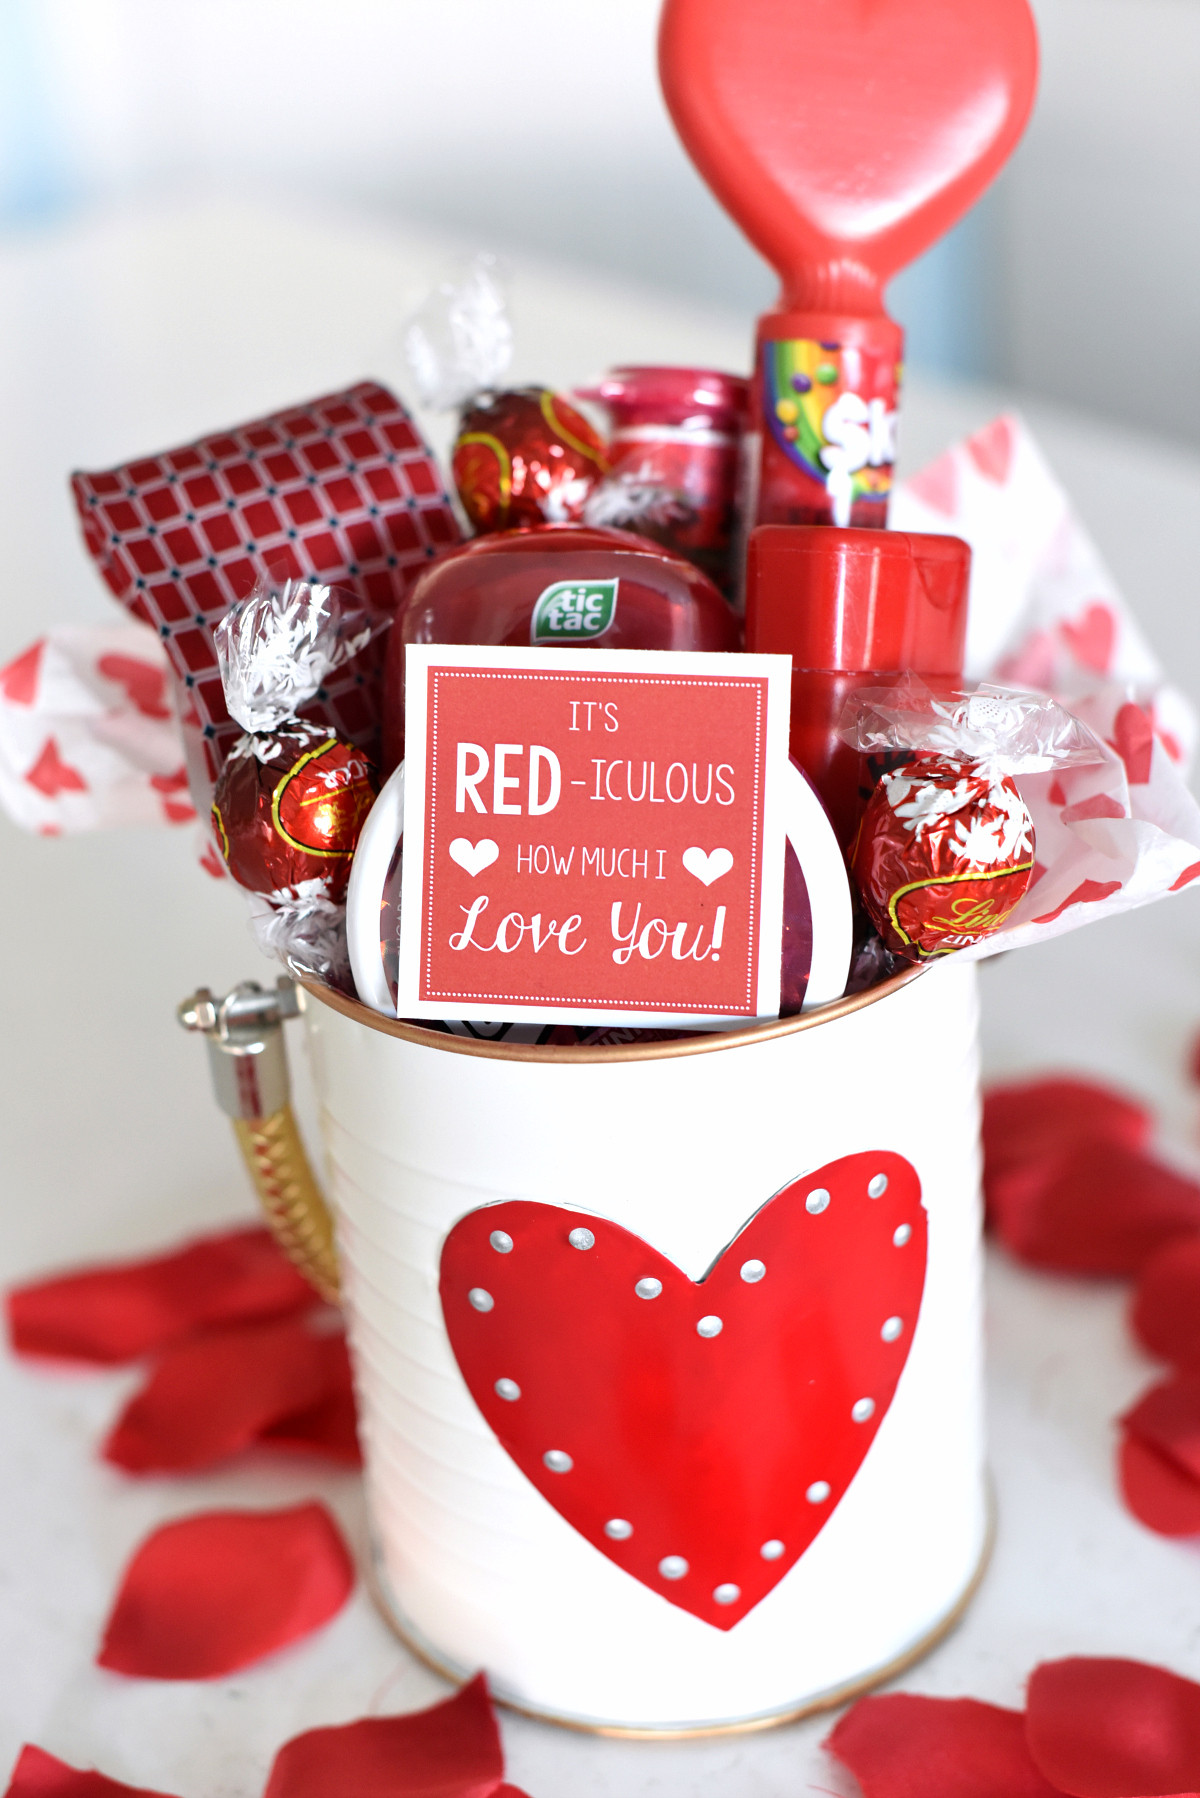 Valentine Husband Gift Ideas
 Cute Valentine s Day Gift Idea RED iculous Basket